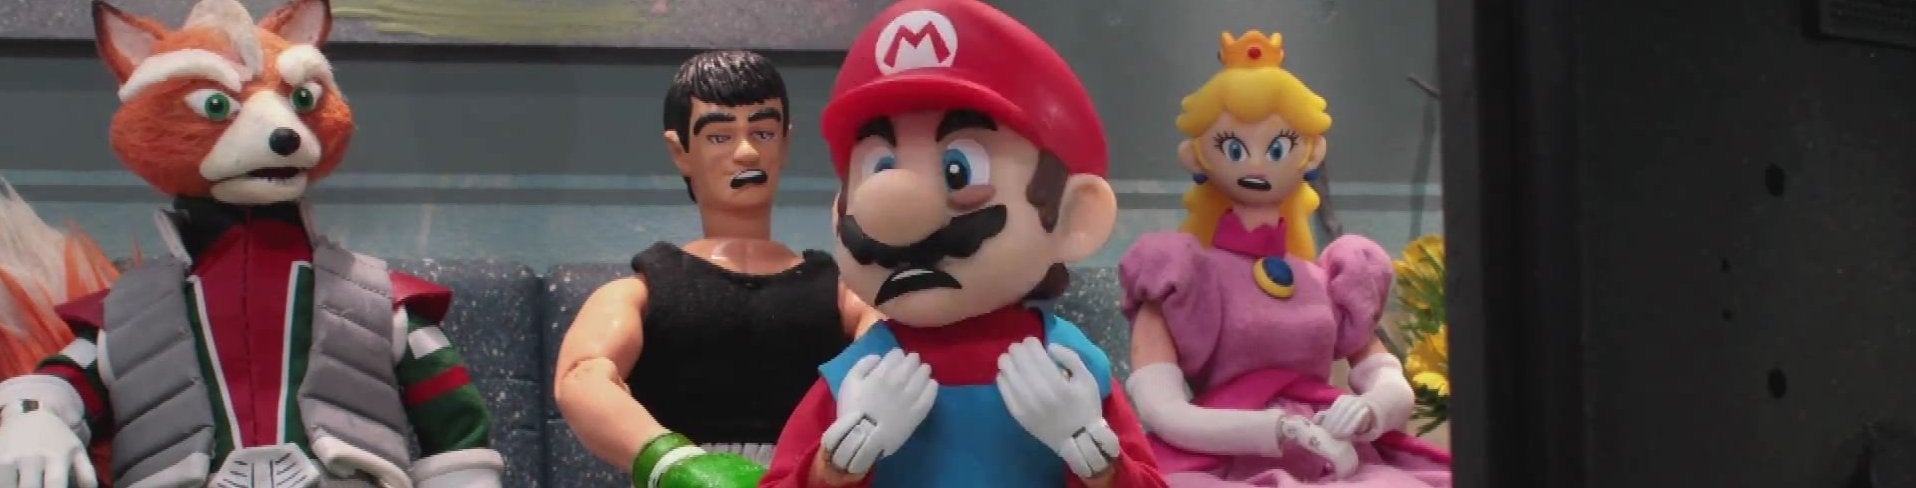 Image for Directly to you: Nintendo wins E3 on its own terms